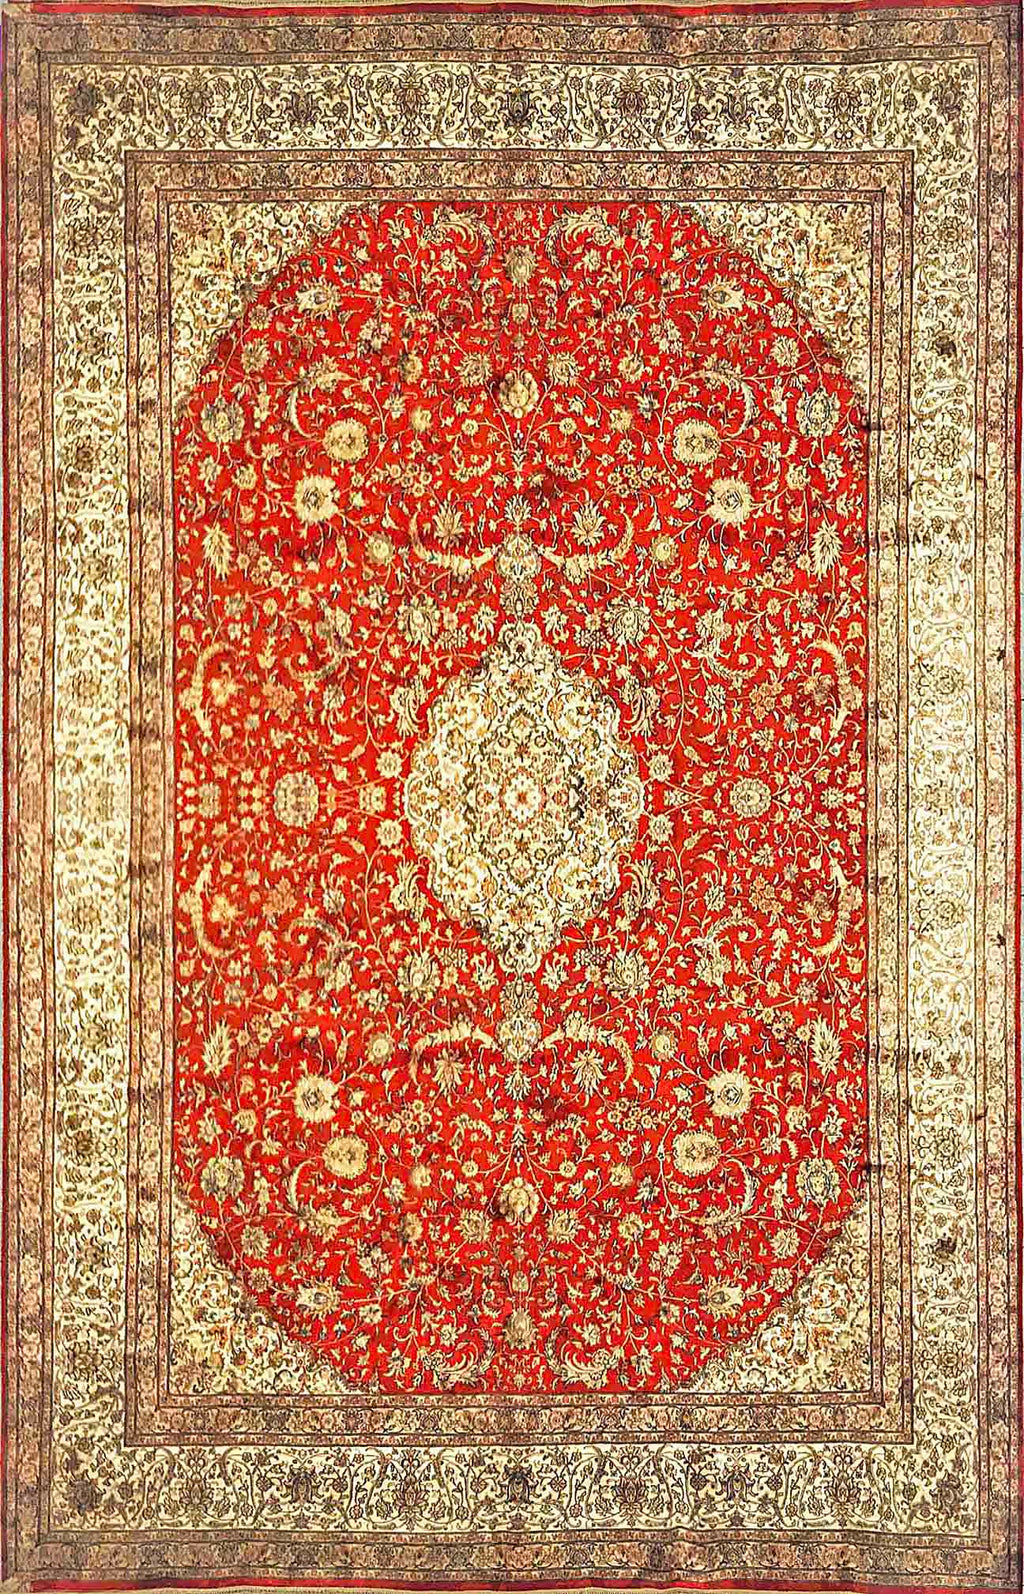 A 9 feet by 12 feet Kashmiri silk on silk carpet/rug. The colours used on the rug are rust,red,beige and golden brown.